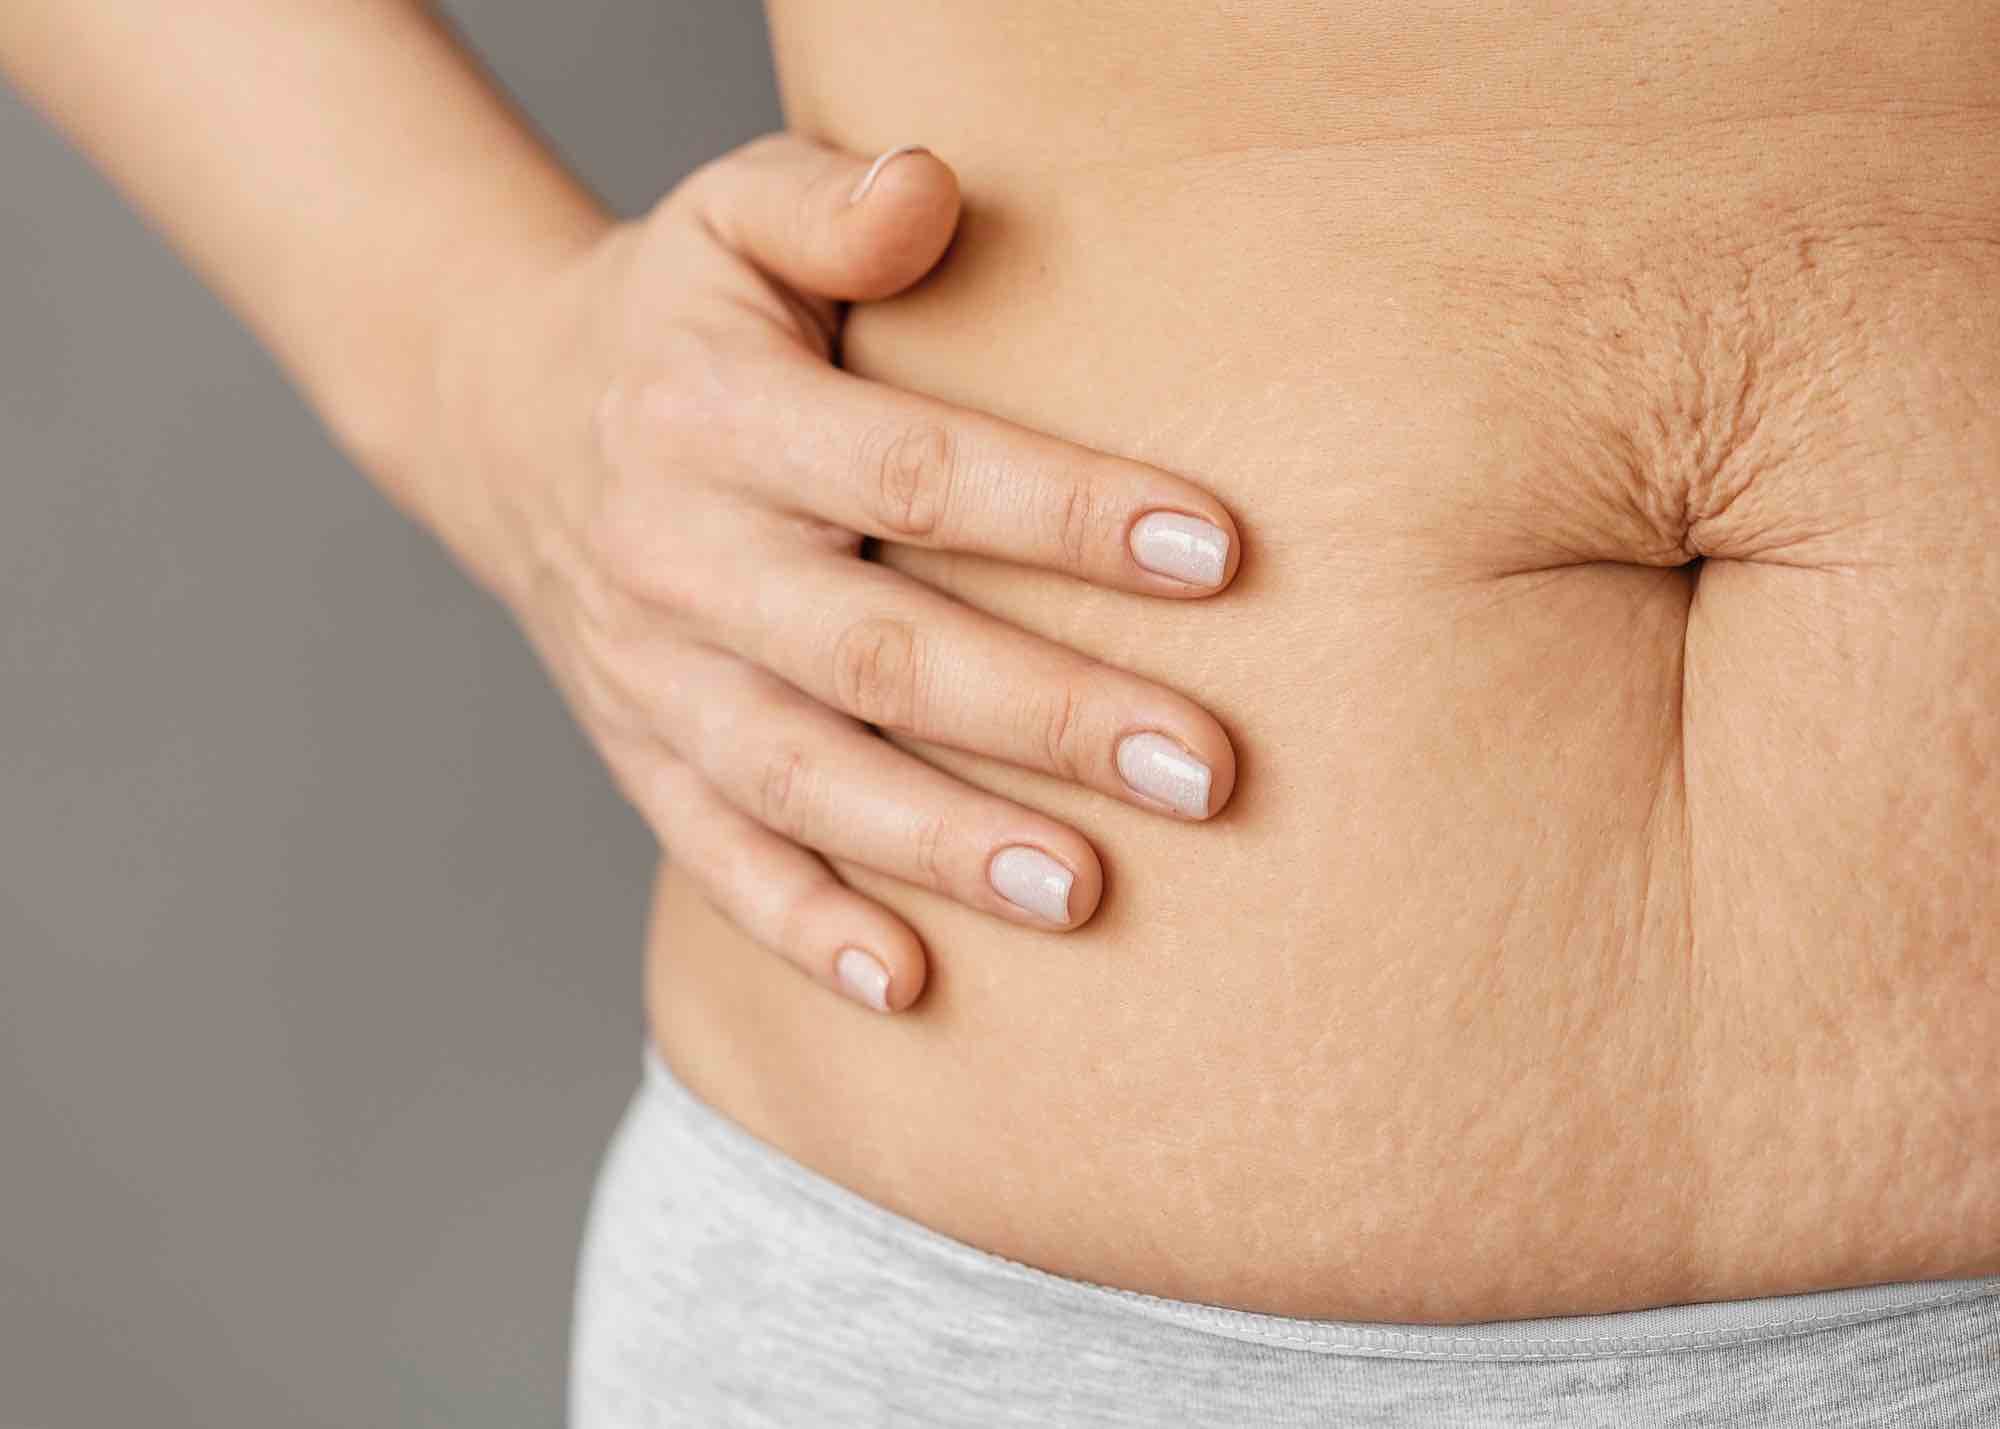 Home Remedies to Tighten Skin on the Stomach. Tips from RAREV